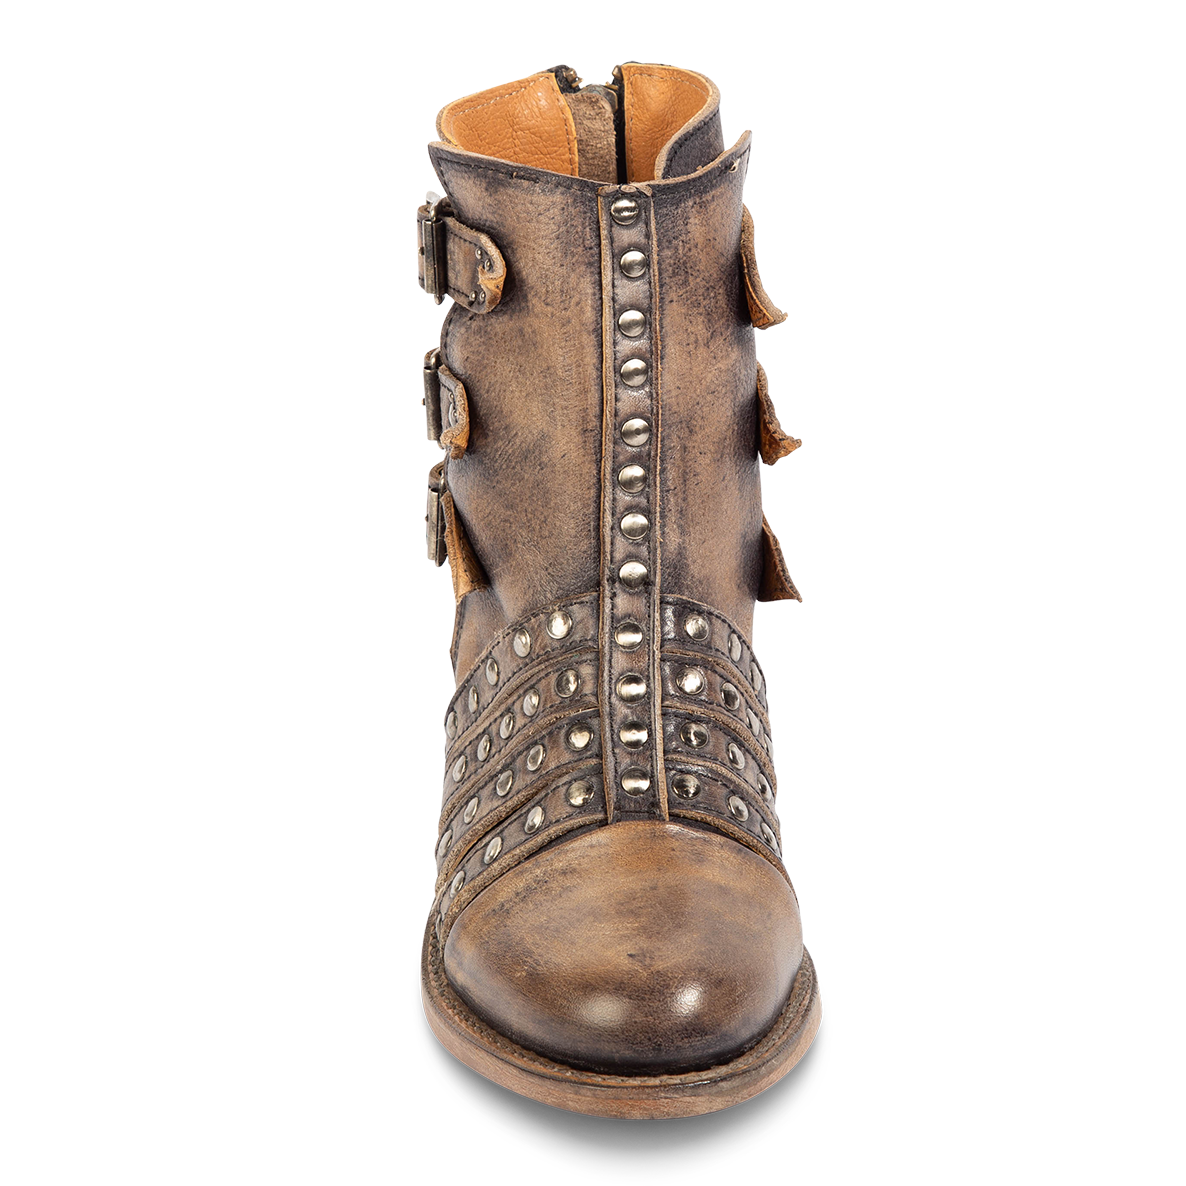 Front view showing intricate silver stud detailing on FREEBIRD women's Citadel black distressed leather bootie